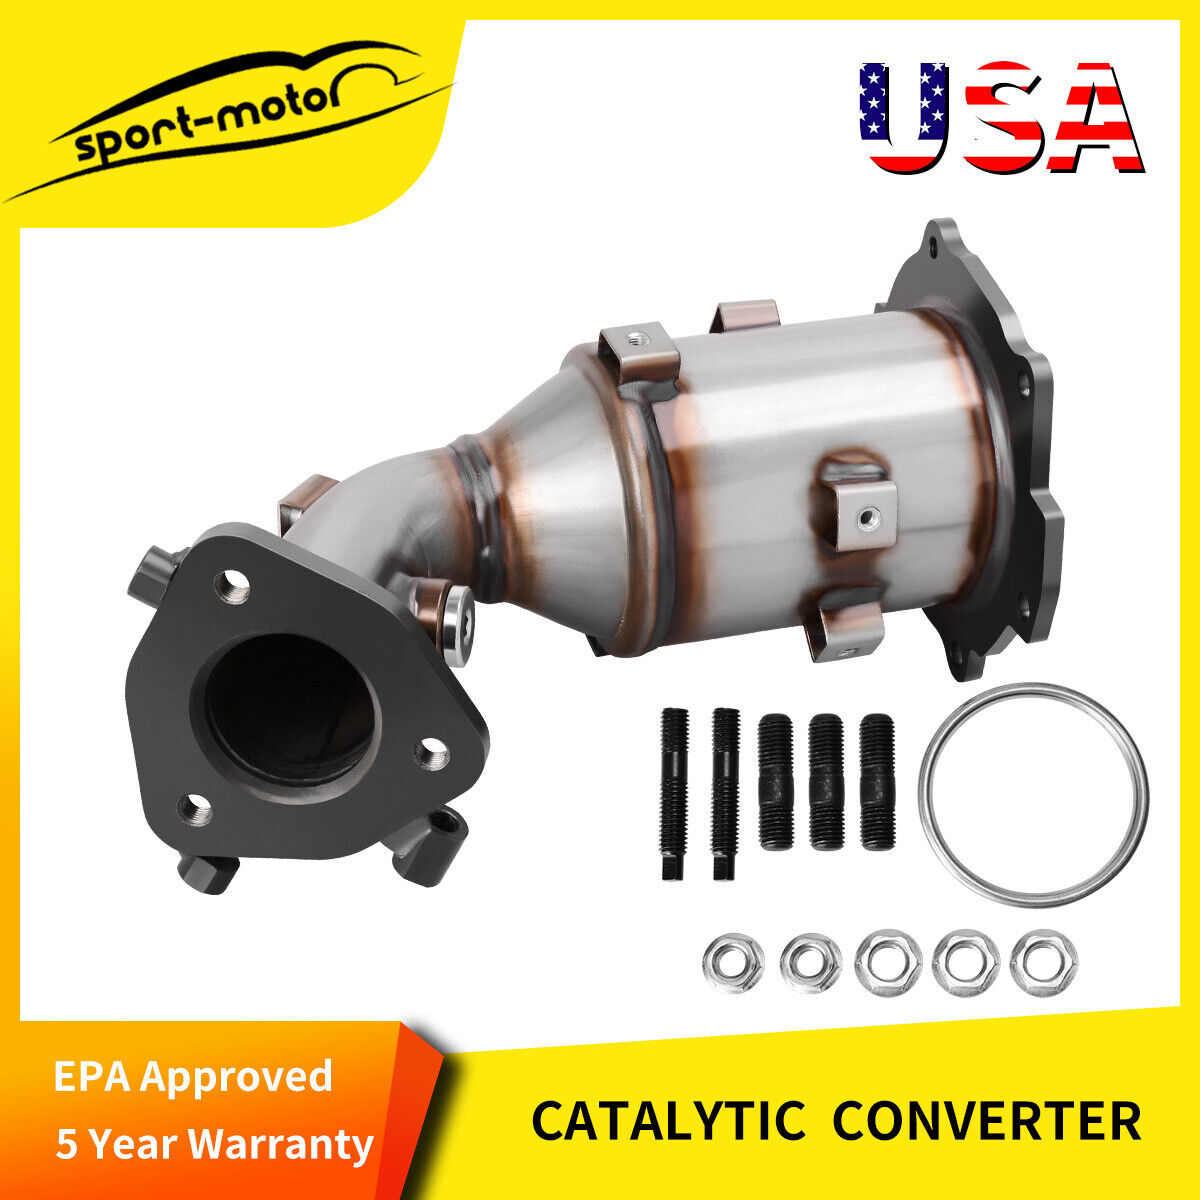 Catalytic Converter EPA Approved for Nissan Altima 2002-2006 Maxima 2004-2008